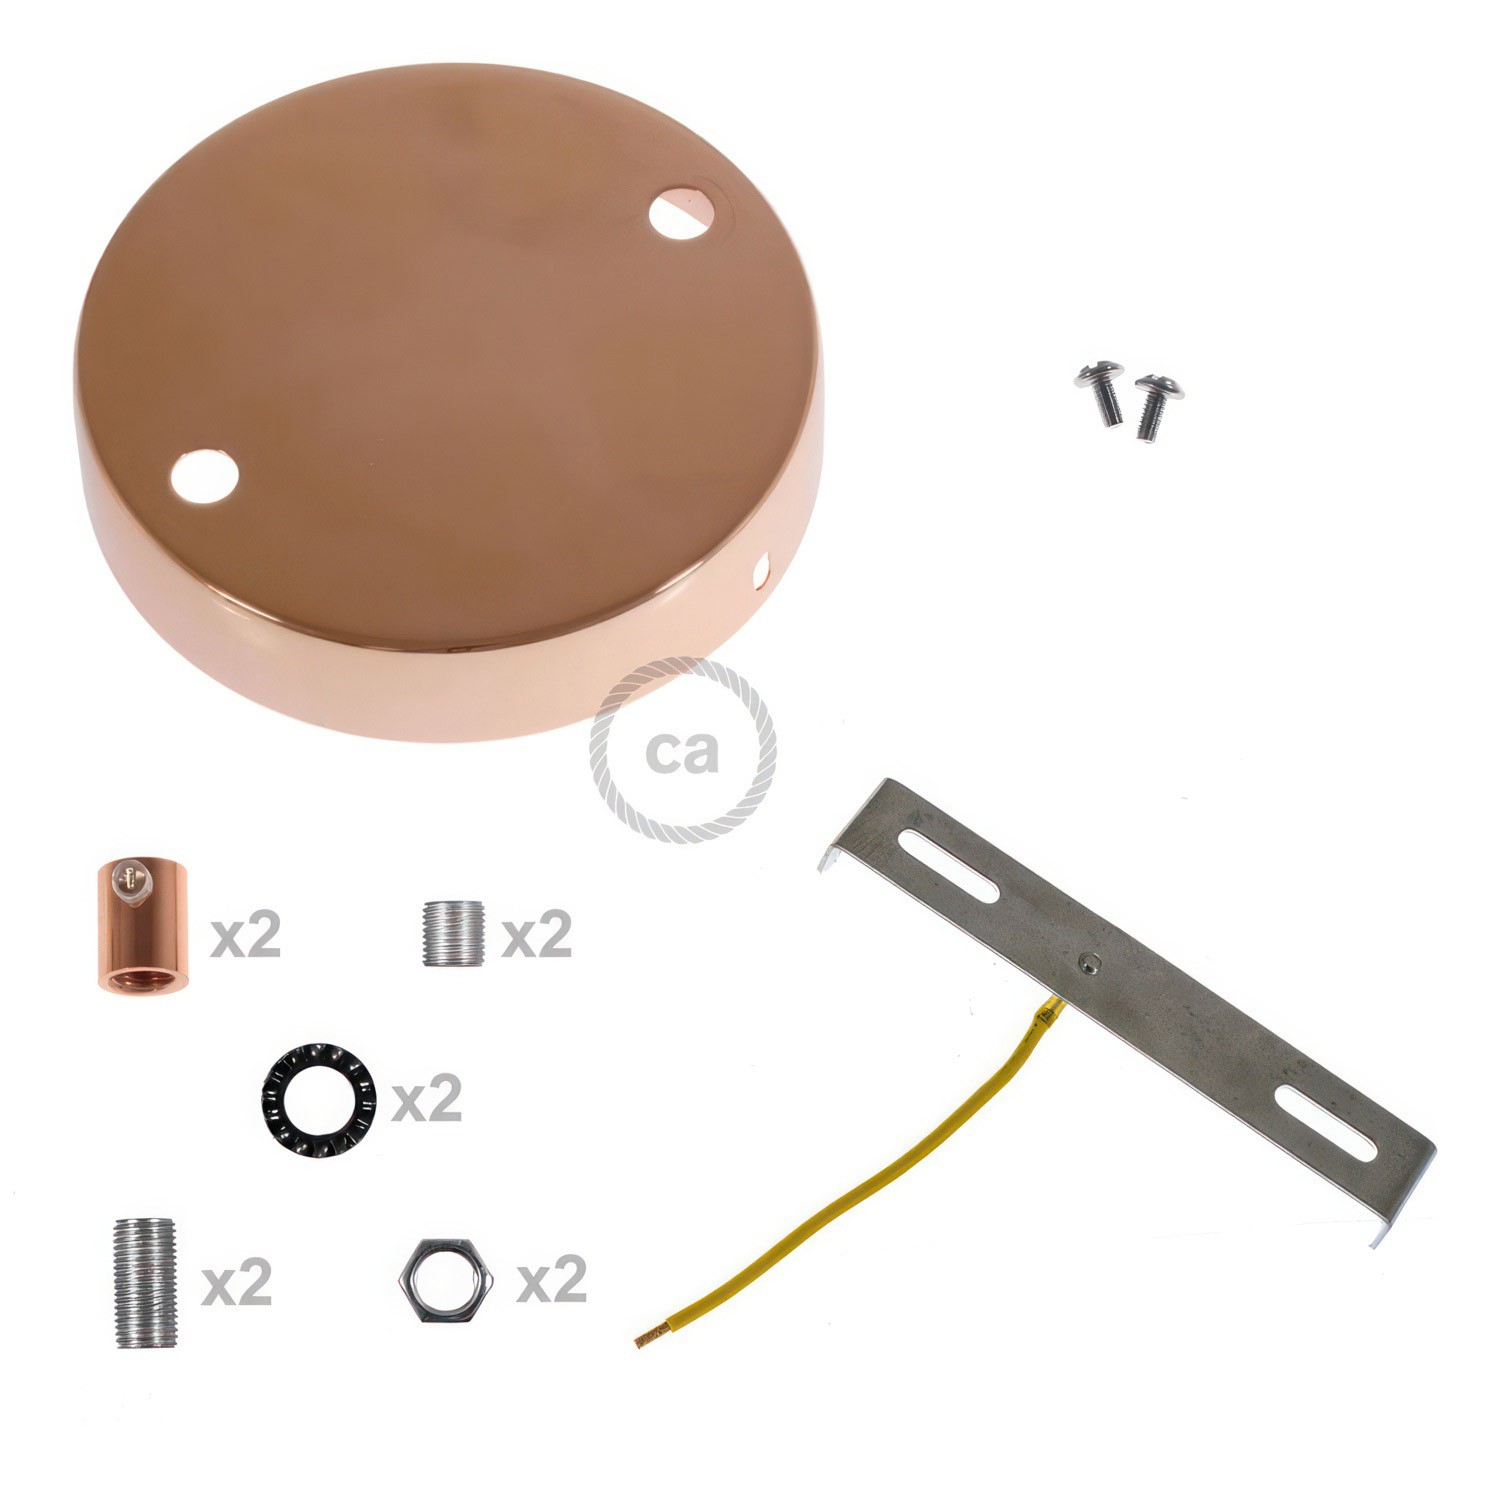 Cylindrical metal 2-hole ceiling rose kit